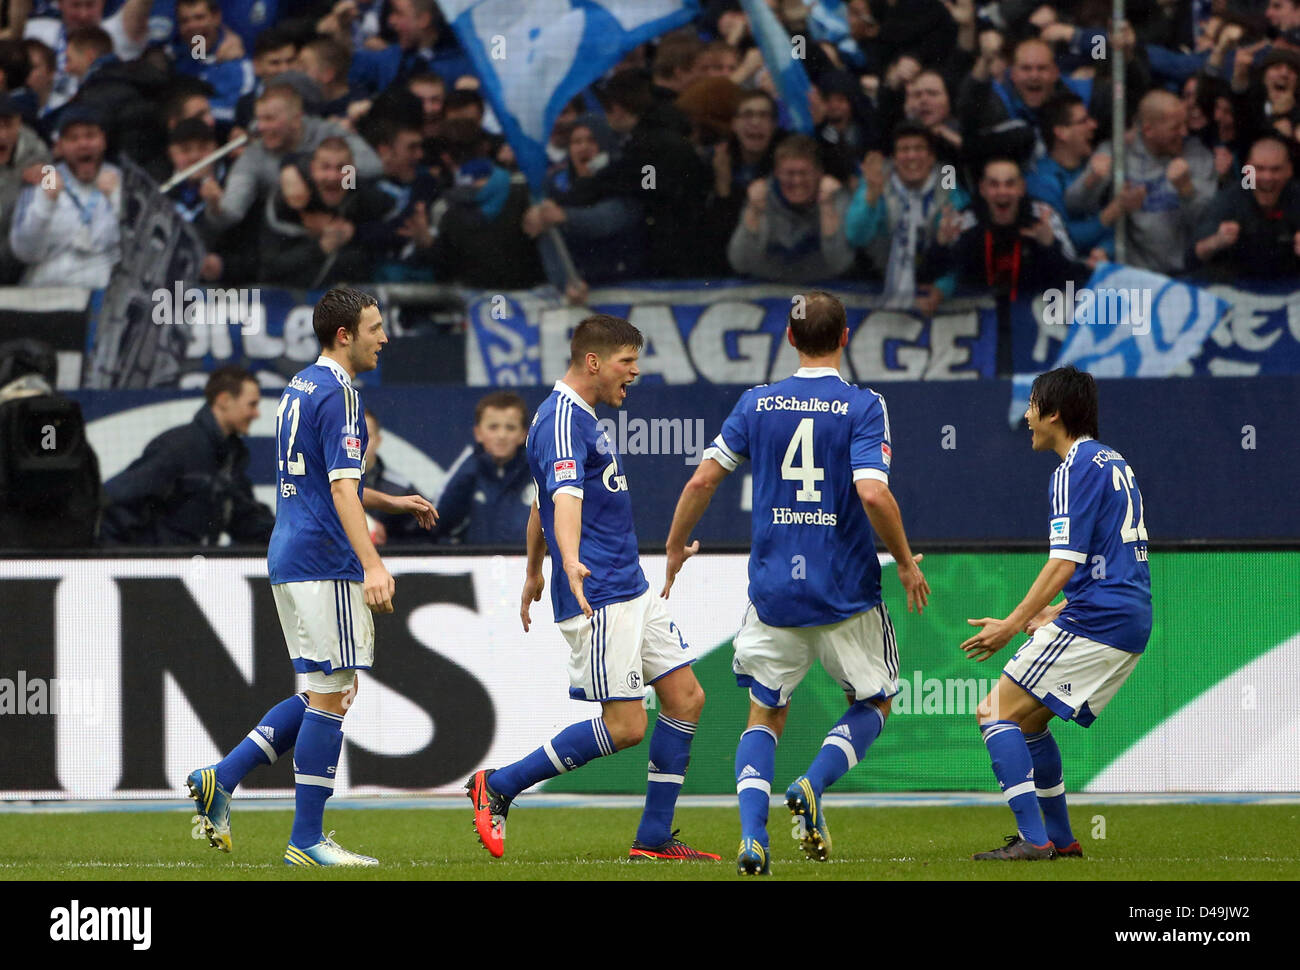 Gelsenkirchen, Germany. 9th March 2013. Schalke's Klaas-Jan Huntelaar (2-L) celebrates his 2-0 goal with teammates Marco Hoeger (L-R), Benedikt Hoewedes and Atsuto Uchida during the Bundesliga soccer match between FC Schalke 04 and Borussia Dortmund at Veltins-Arena in Gelsenkirchen, Germany, 09 March 2013. Photo: FRISO GENTSCH  (ATTENTION: EMBARGO CONDITIONS! The DFL permits the further  utilisation of up to 15 pictures only (no sequntial pictures or video-similar series of pictures allowed) via the internet and online media during the match (including halftime), taken from inside the stadium Stock Photo